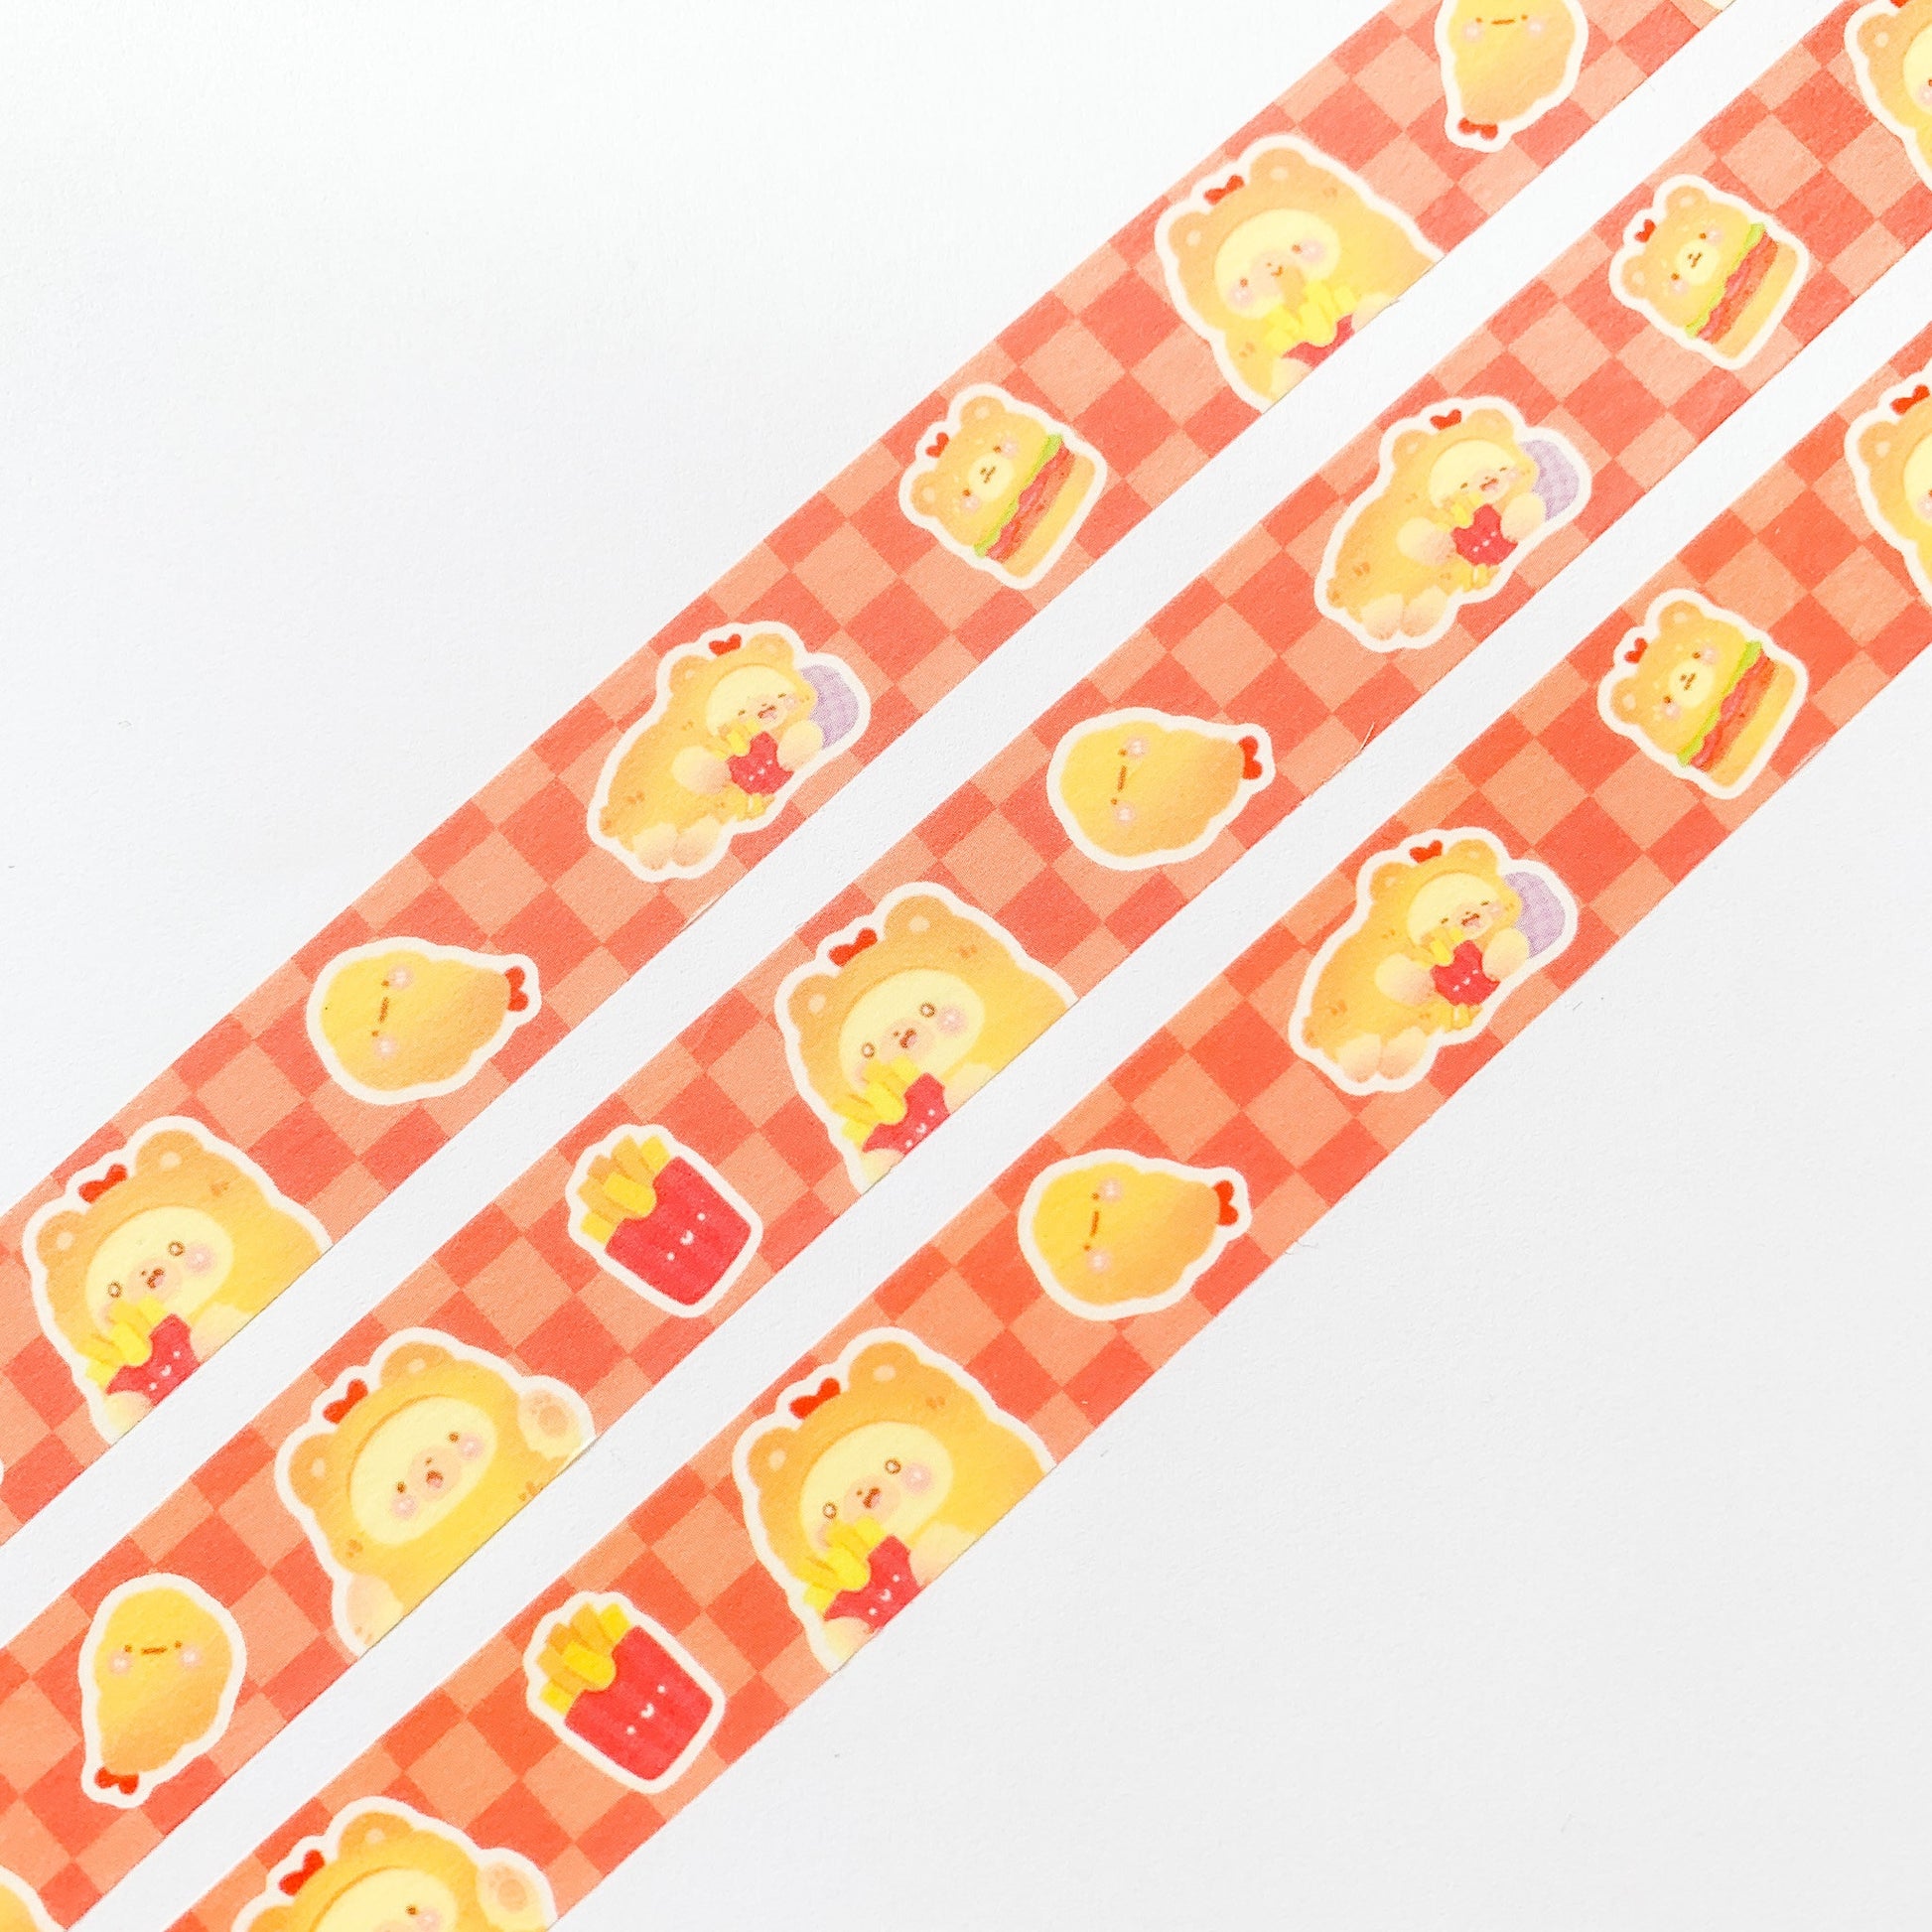 bear in tempura outfit with hamburgers and fries washi tape close up 2